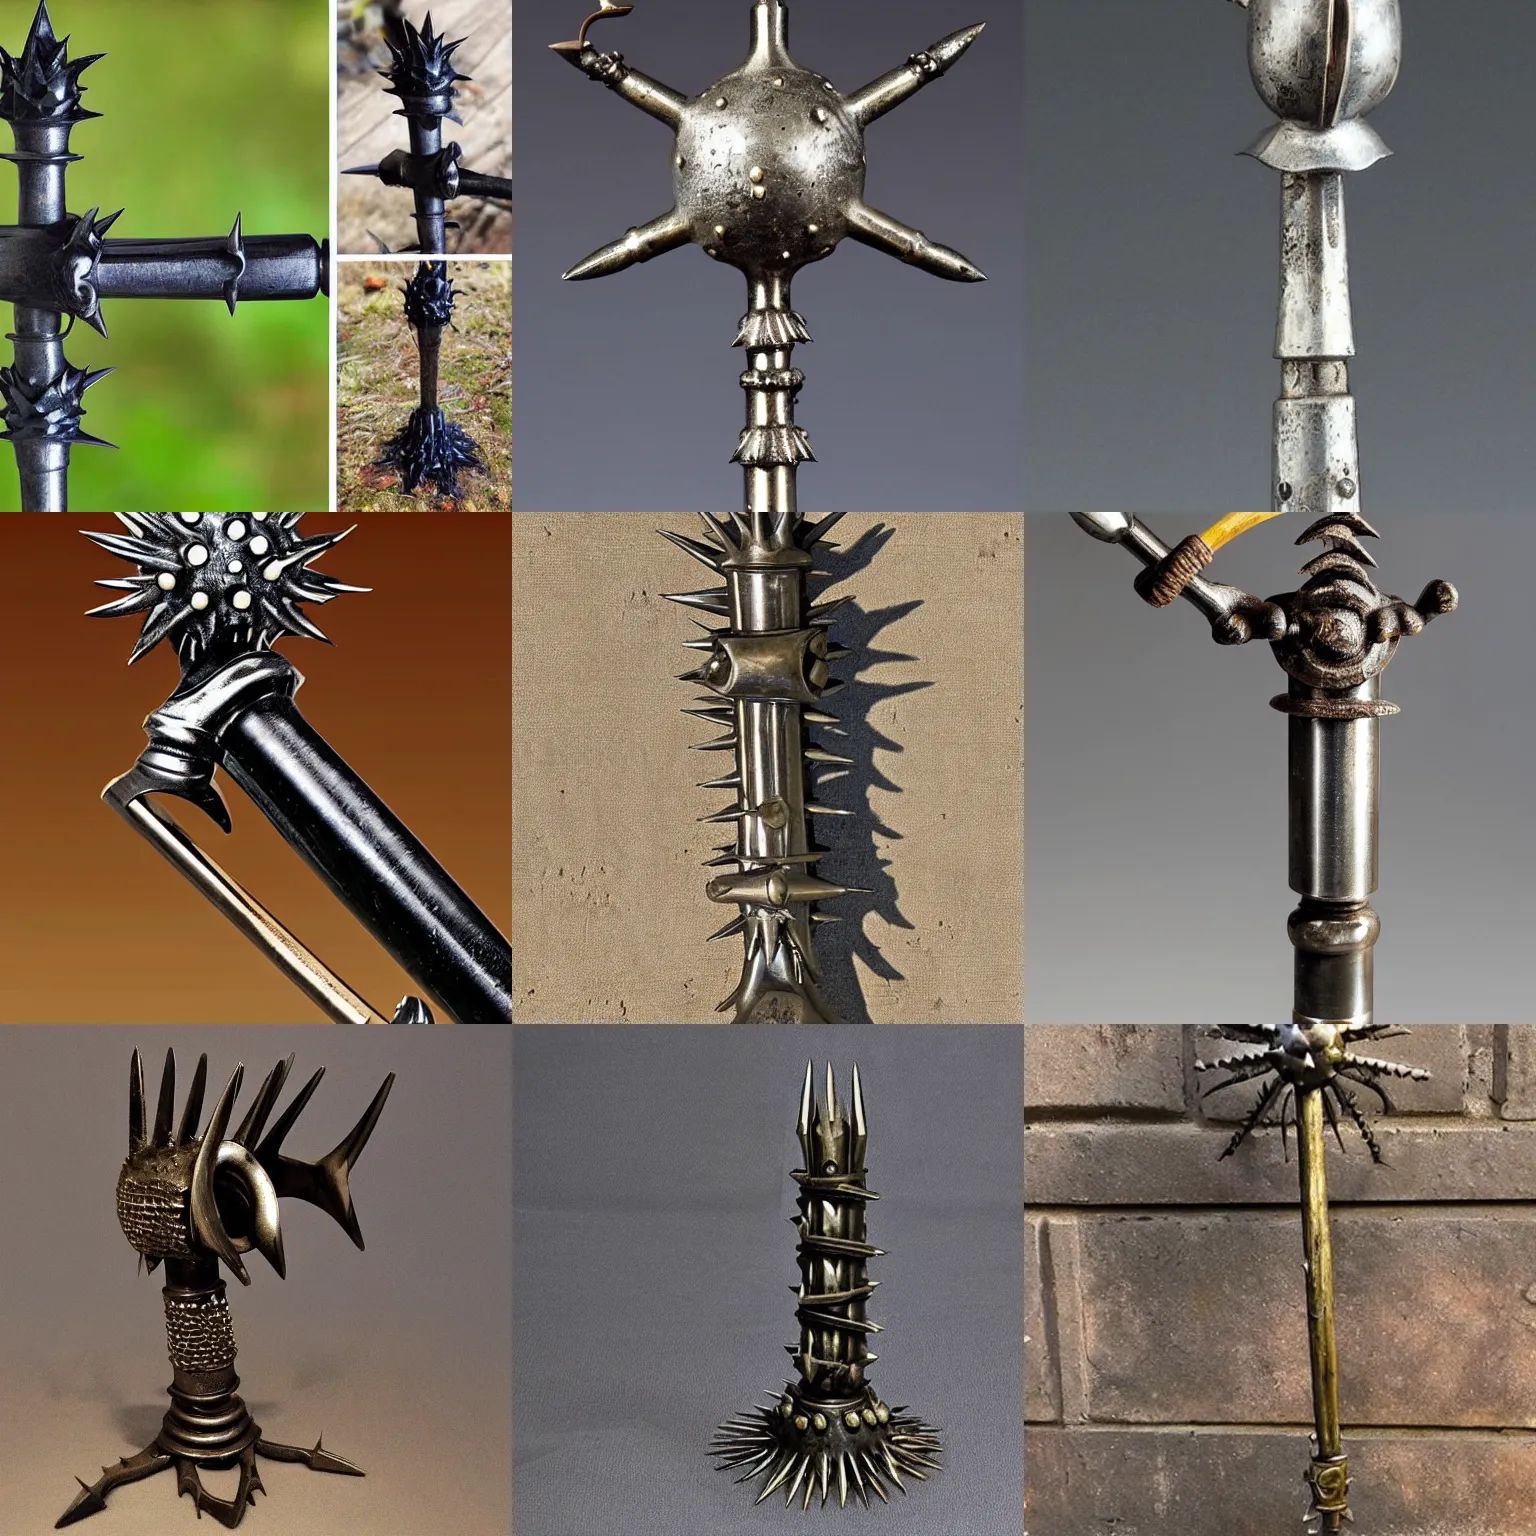 Prompt: A medieval spiked iron mace